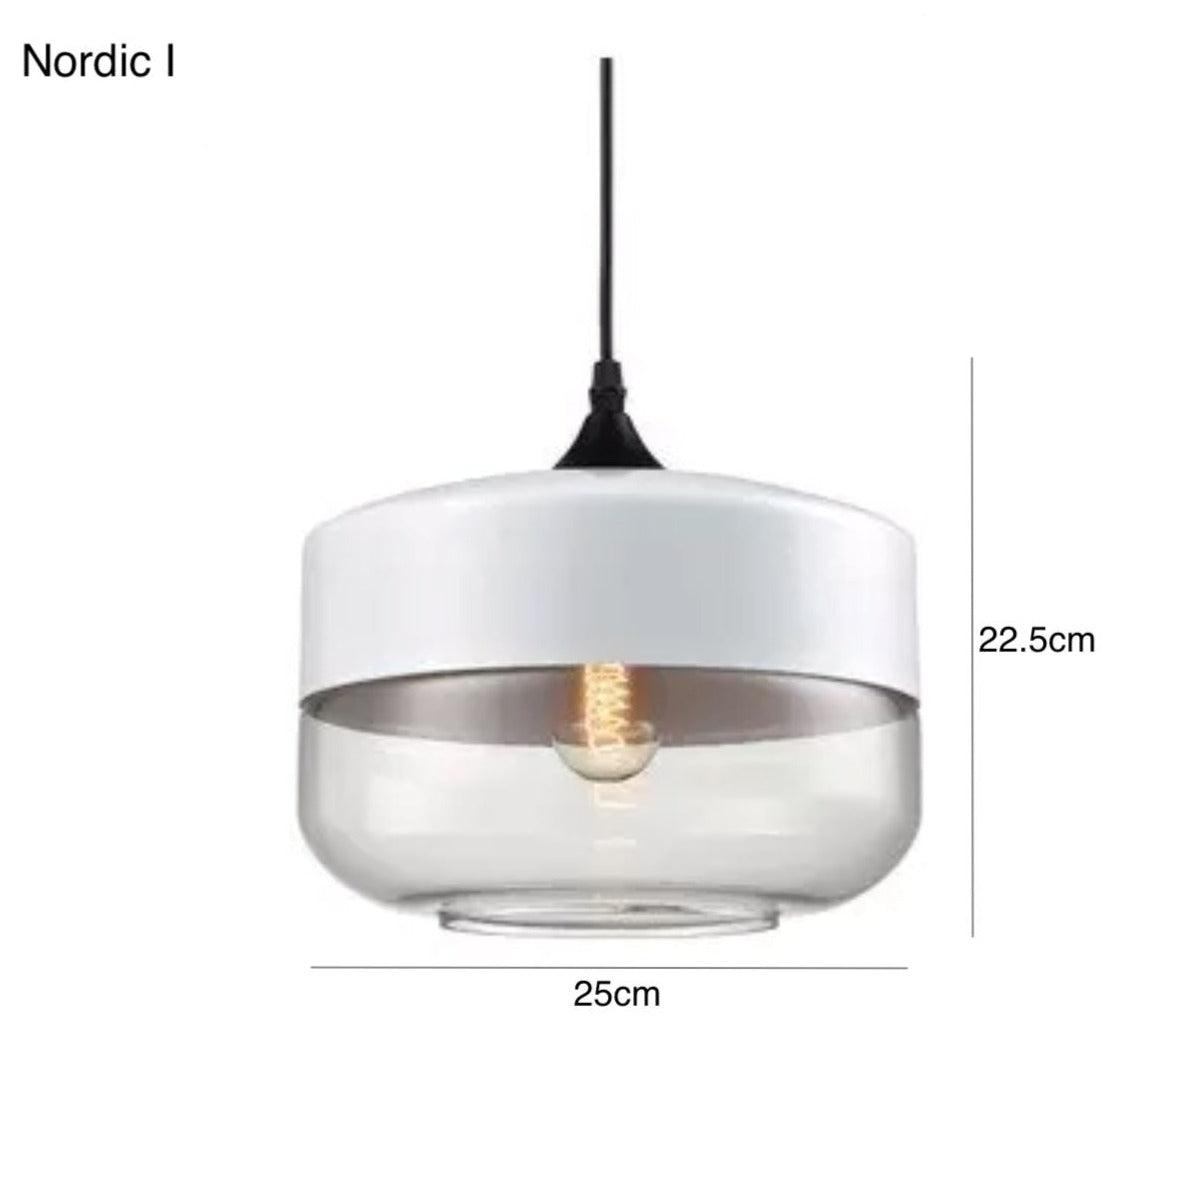 NORDIC Collection Hestia + Co. NORDIC I White and Clear 